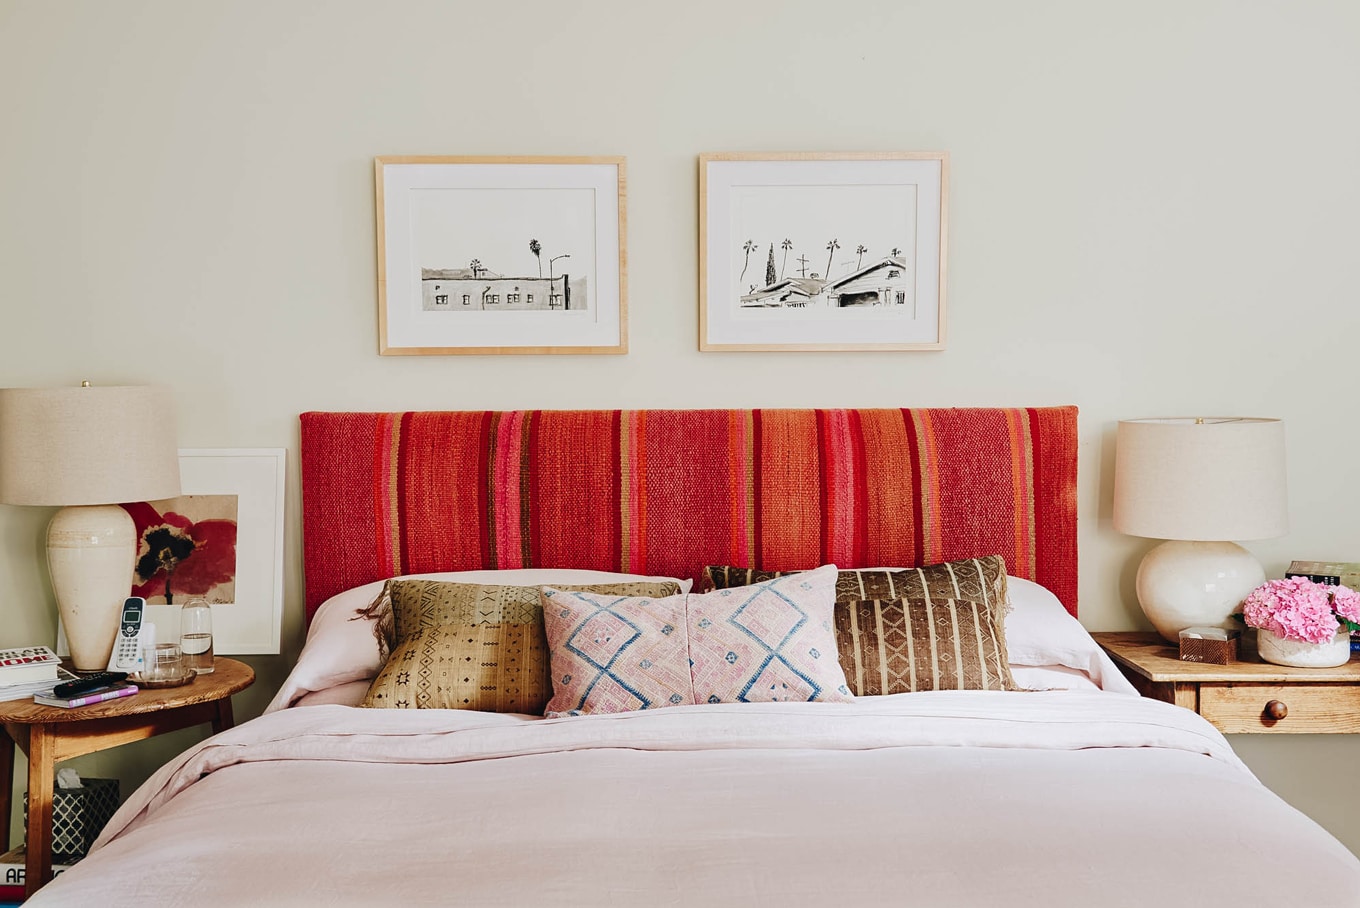 pink and red frazada blanket heardboard with mixed textiles | california style mediterranean house tour on coco kelley